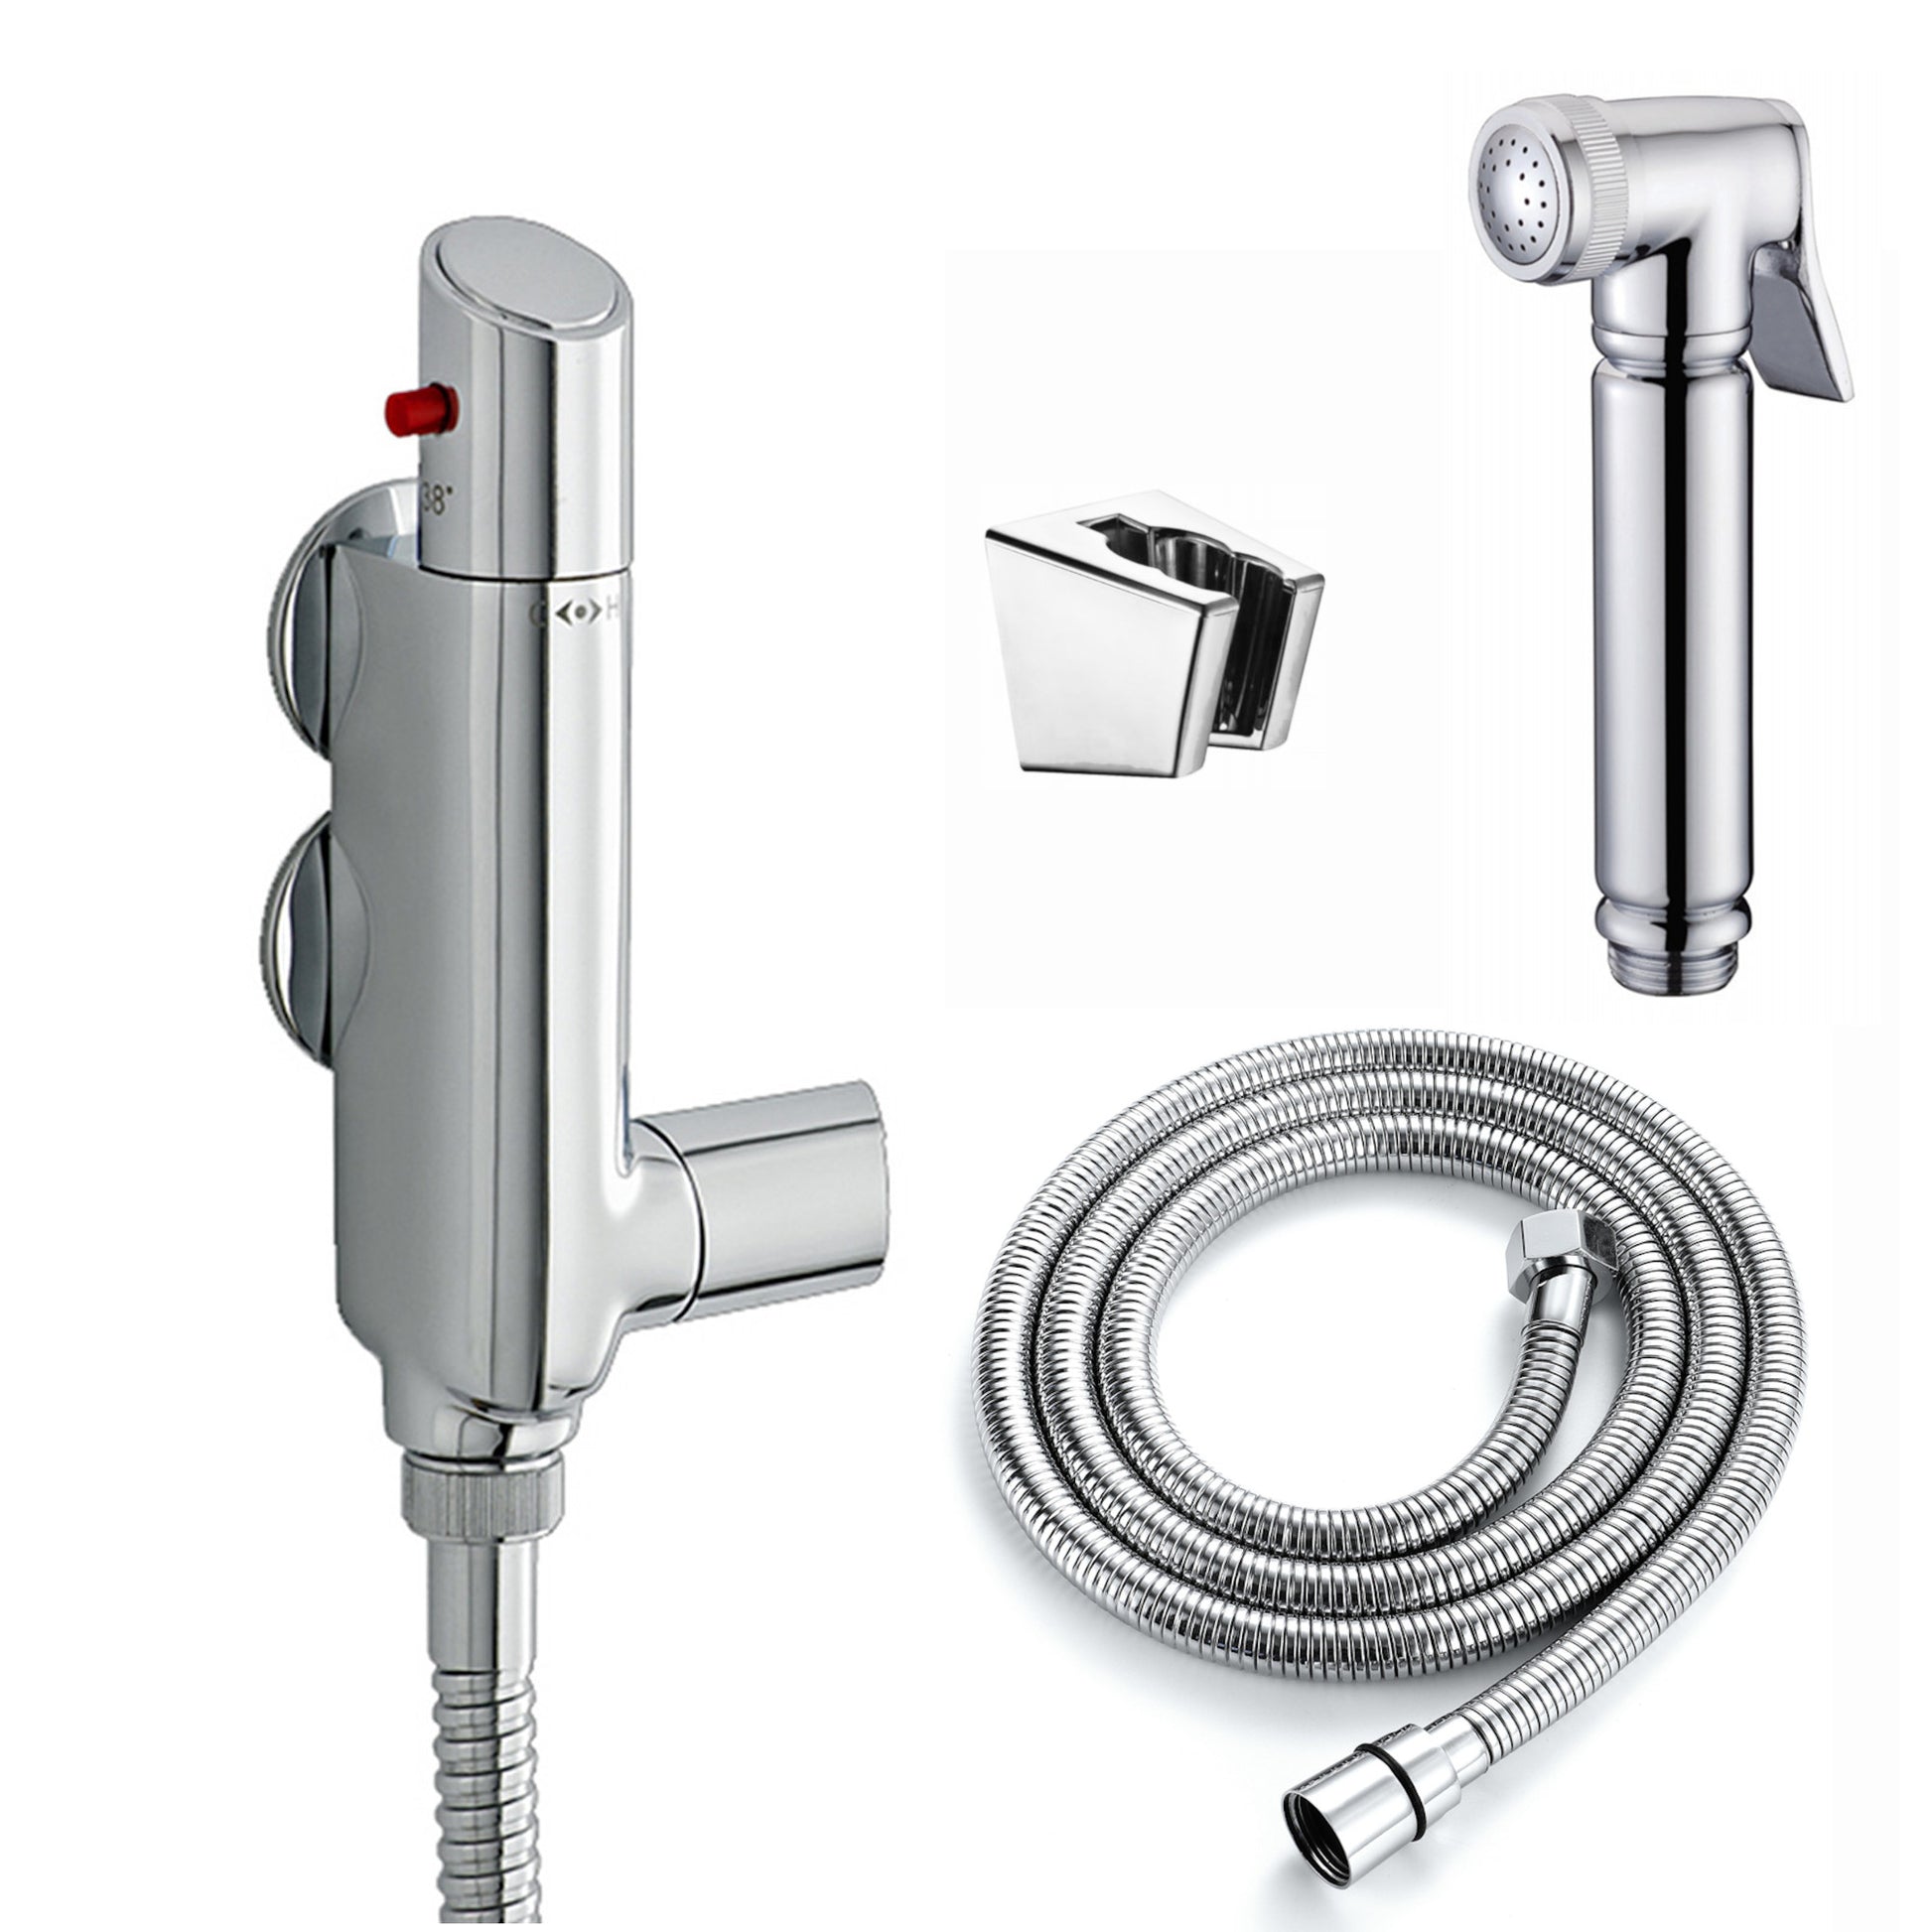 Vito Vertical Thermostatic Shower Bar Mixer Valve Tap With Contemporary Douche Bidet Handshower Spray Kit - Chrome - Showers